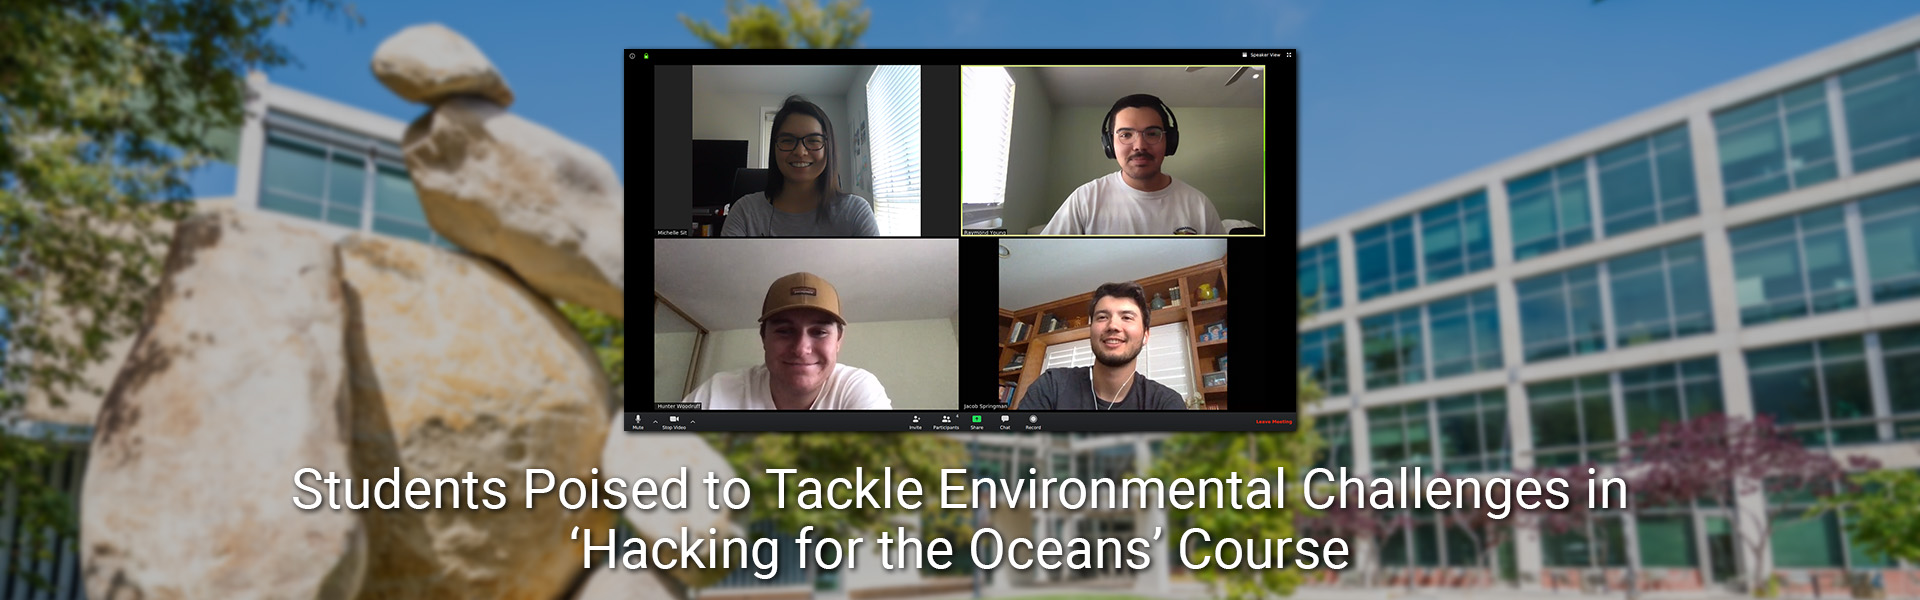 Students Poised to Tackle Environmental Challenges in 'Hacking for the Oceans' Course